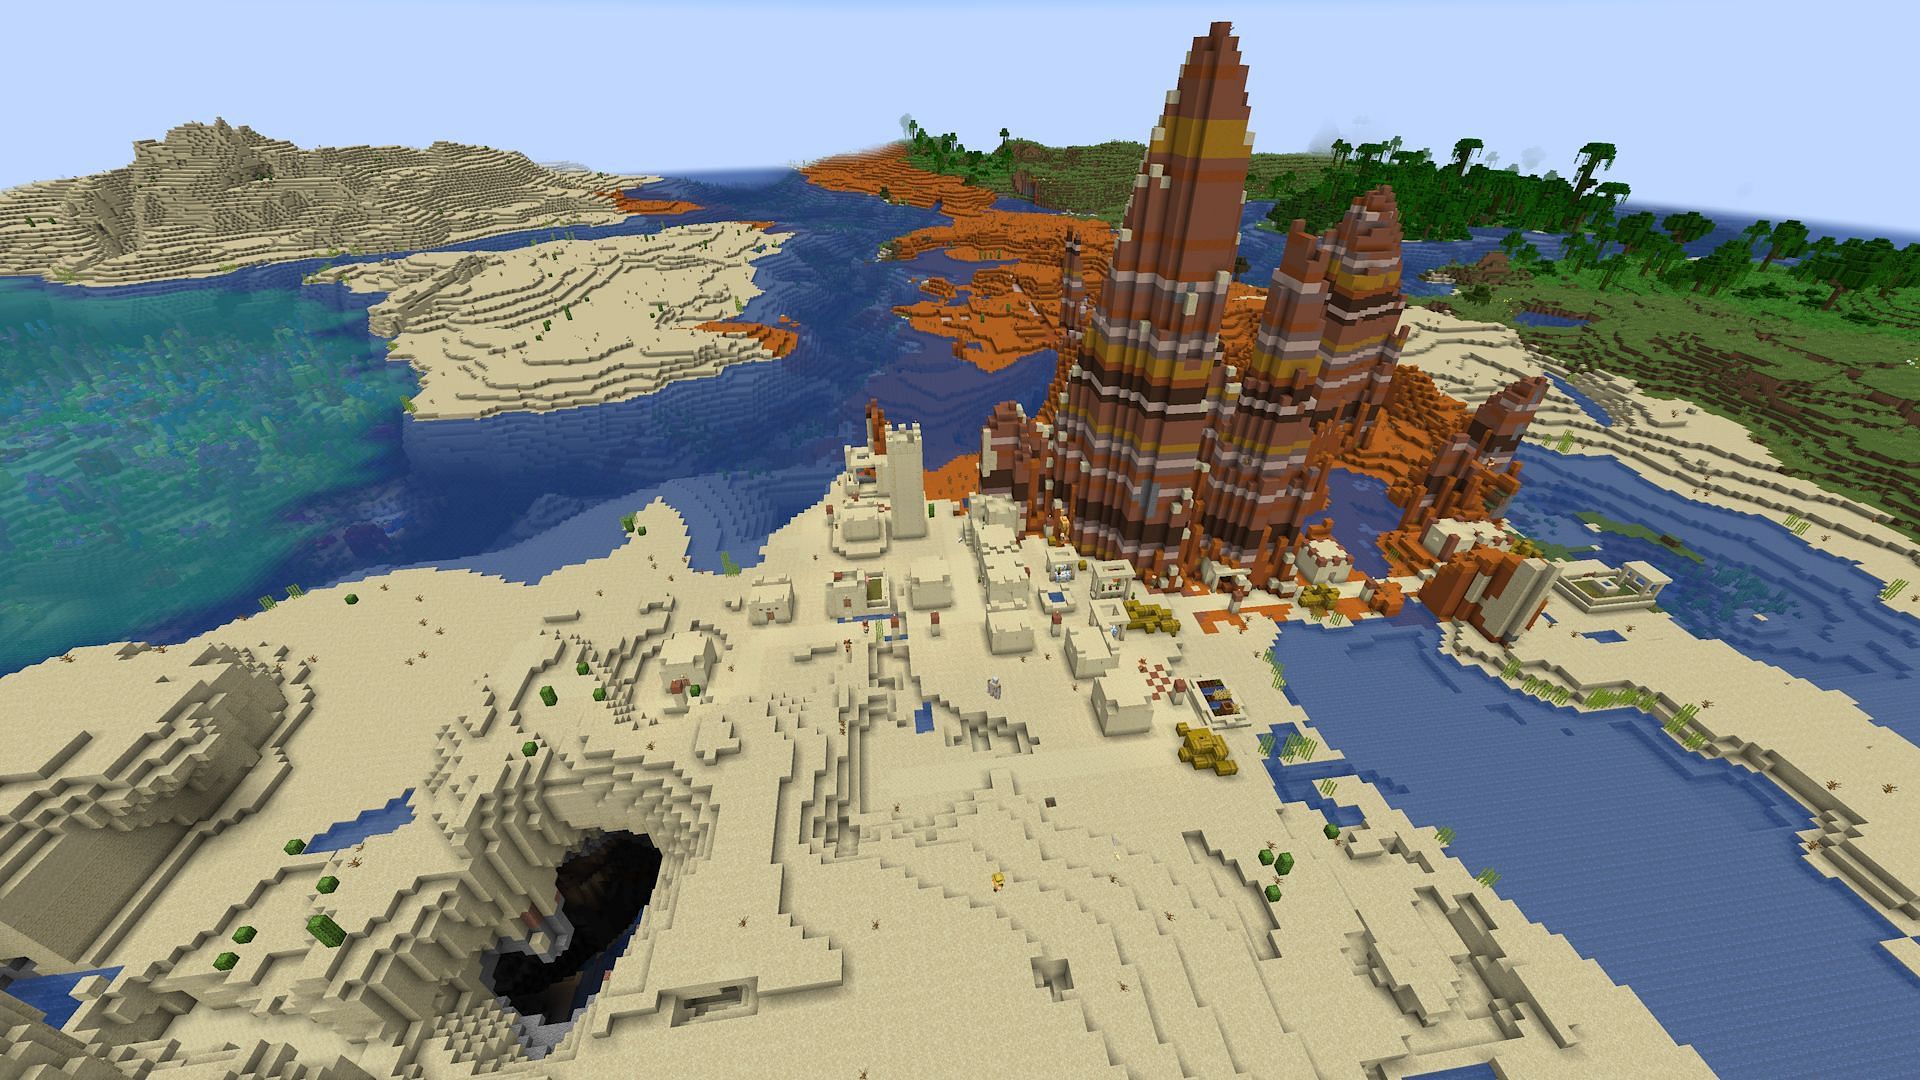 This spawn village is one of many on this amazing seed (Image via Mojang)